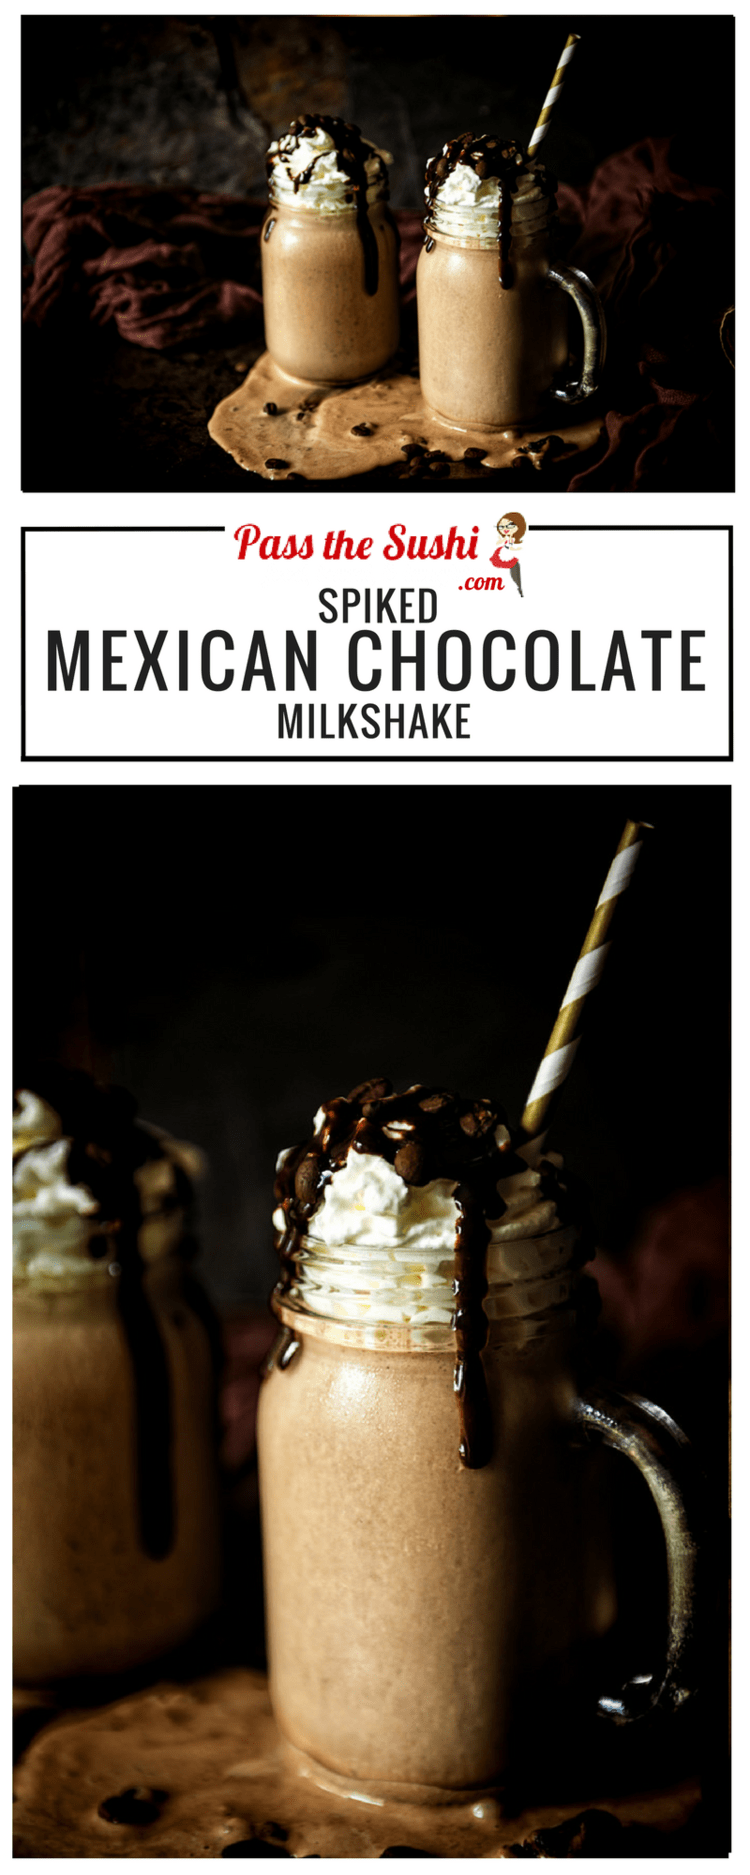 Spiked Mexican Chocolate Milk Shake Recipe - a little heat goes a long way with a shot of tequila anejo and a smooth chocolate sauce in this fun adult only recipe! See the full recipe at PasstheSushi.com 